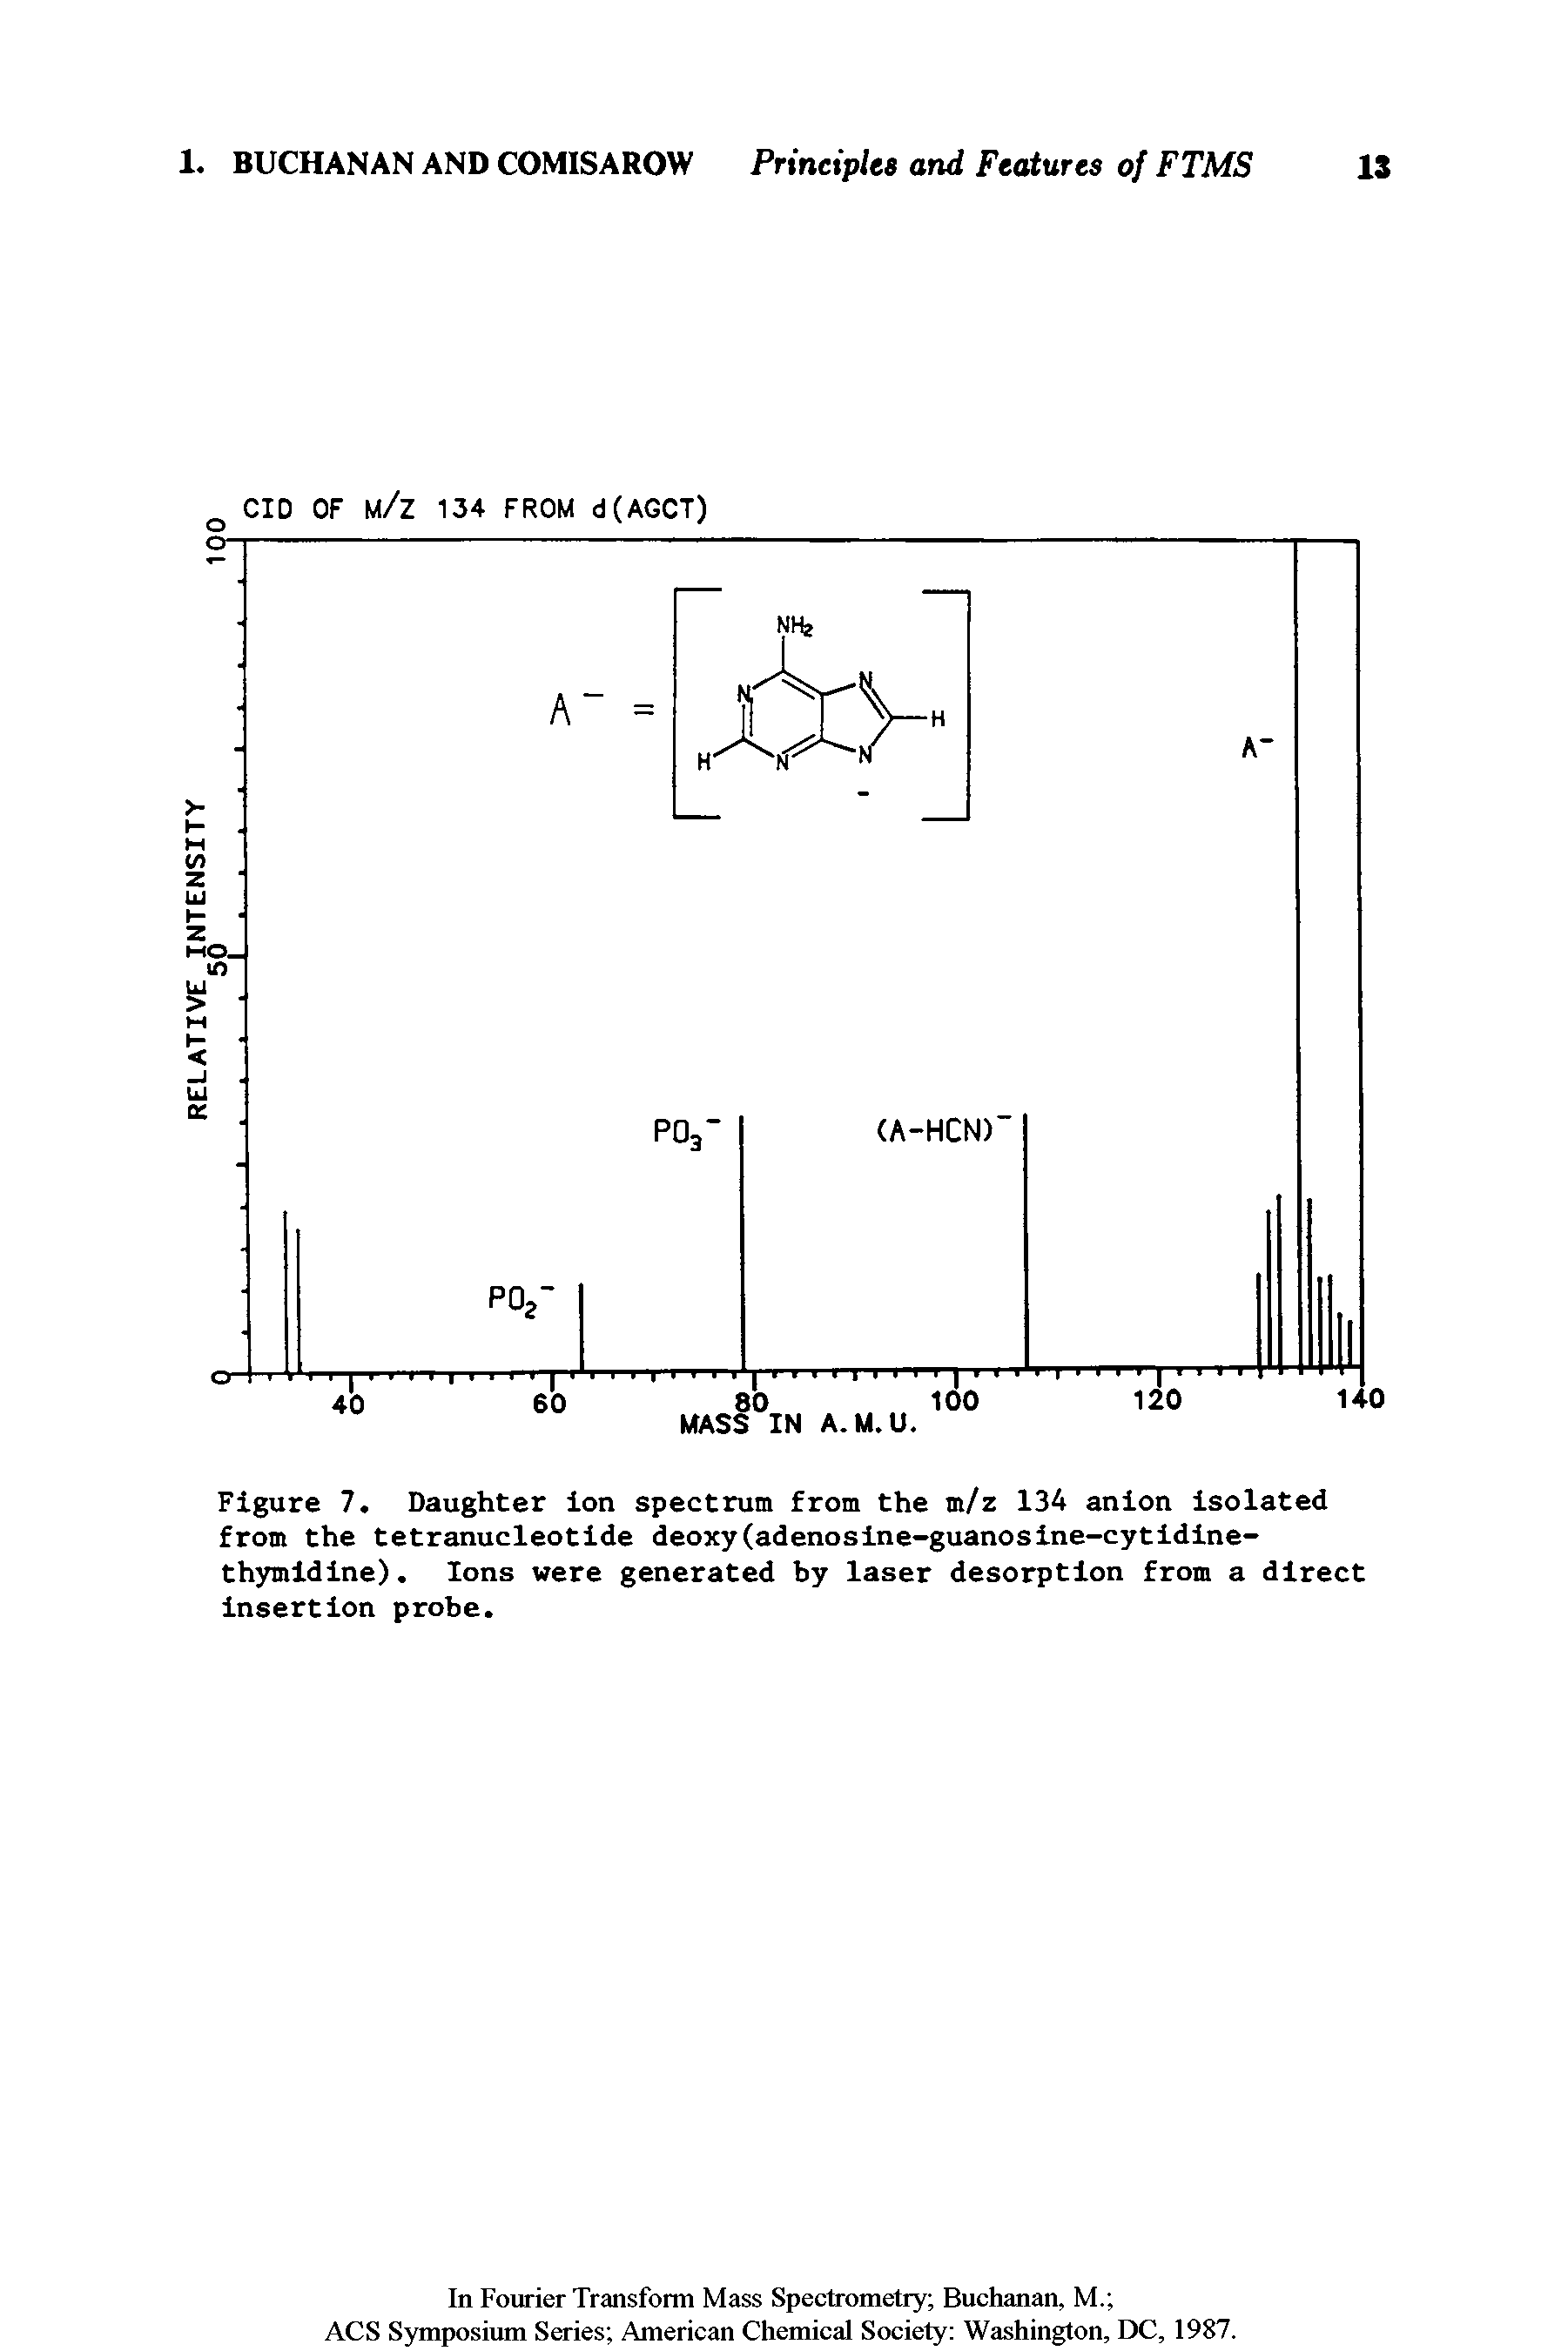 Figure 7. Daughter ion spectrum from the m/z 134 anion isolated from the tetranucleotide deoxy(adenosine-guanosine-cytidine-thymidine). Ions were generated by laser desorption from a direct insertion probe.